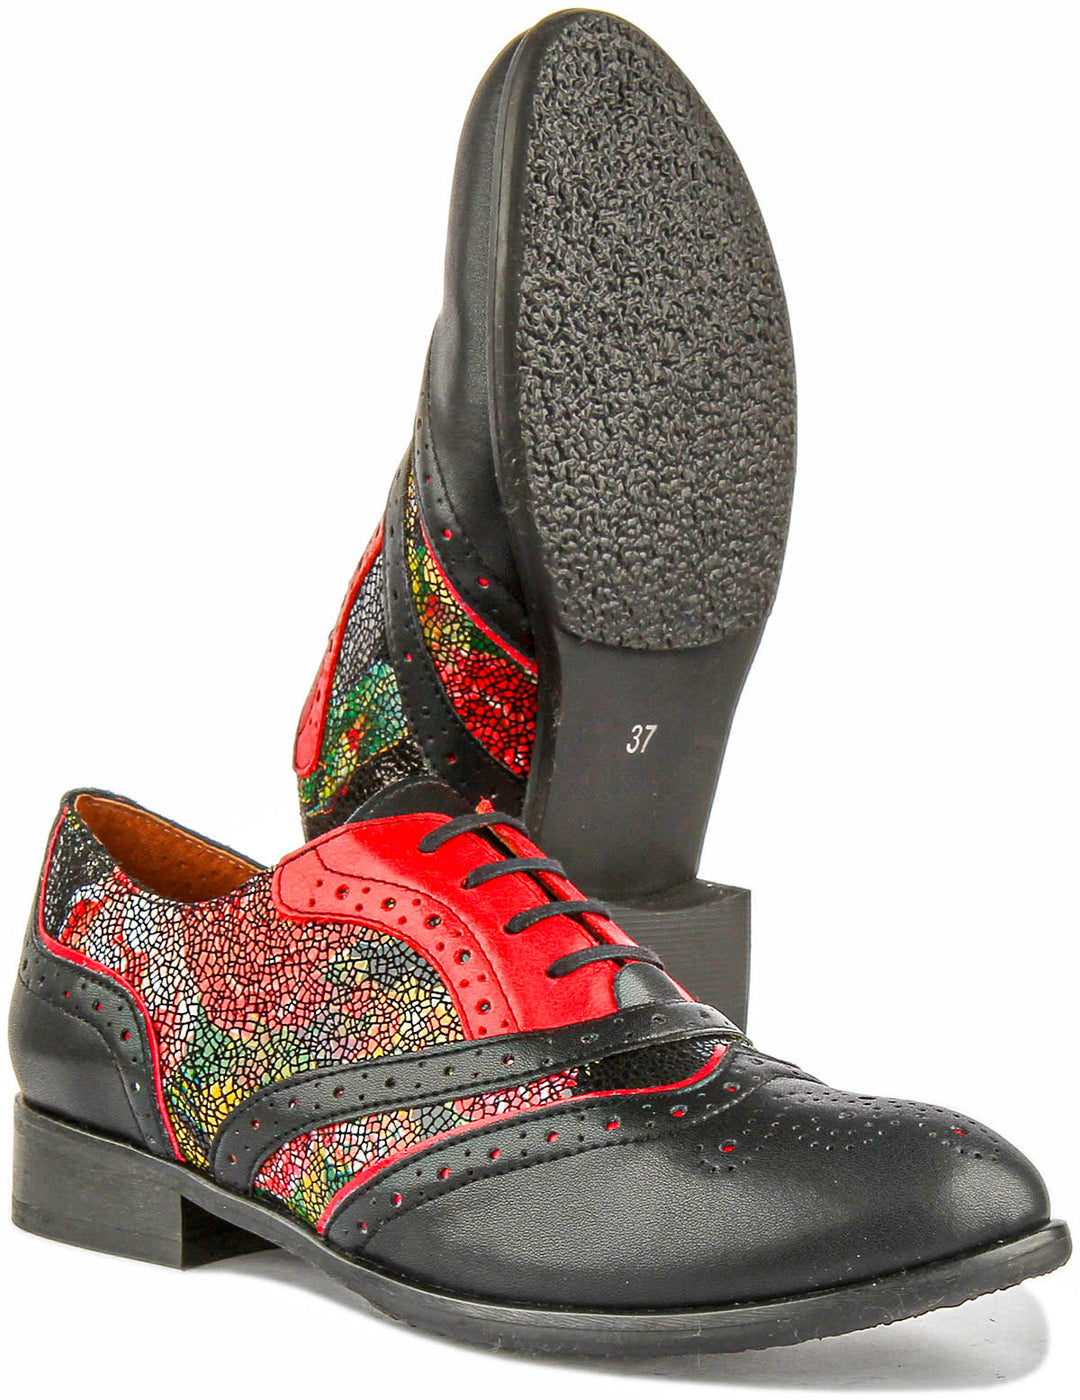 Roxana Lace up Soft Leather Brogue Shoes in Black Floral Red